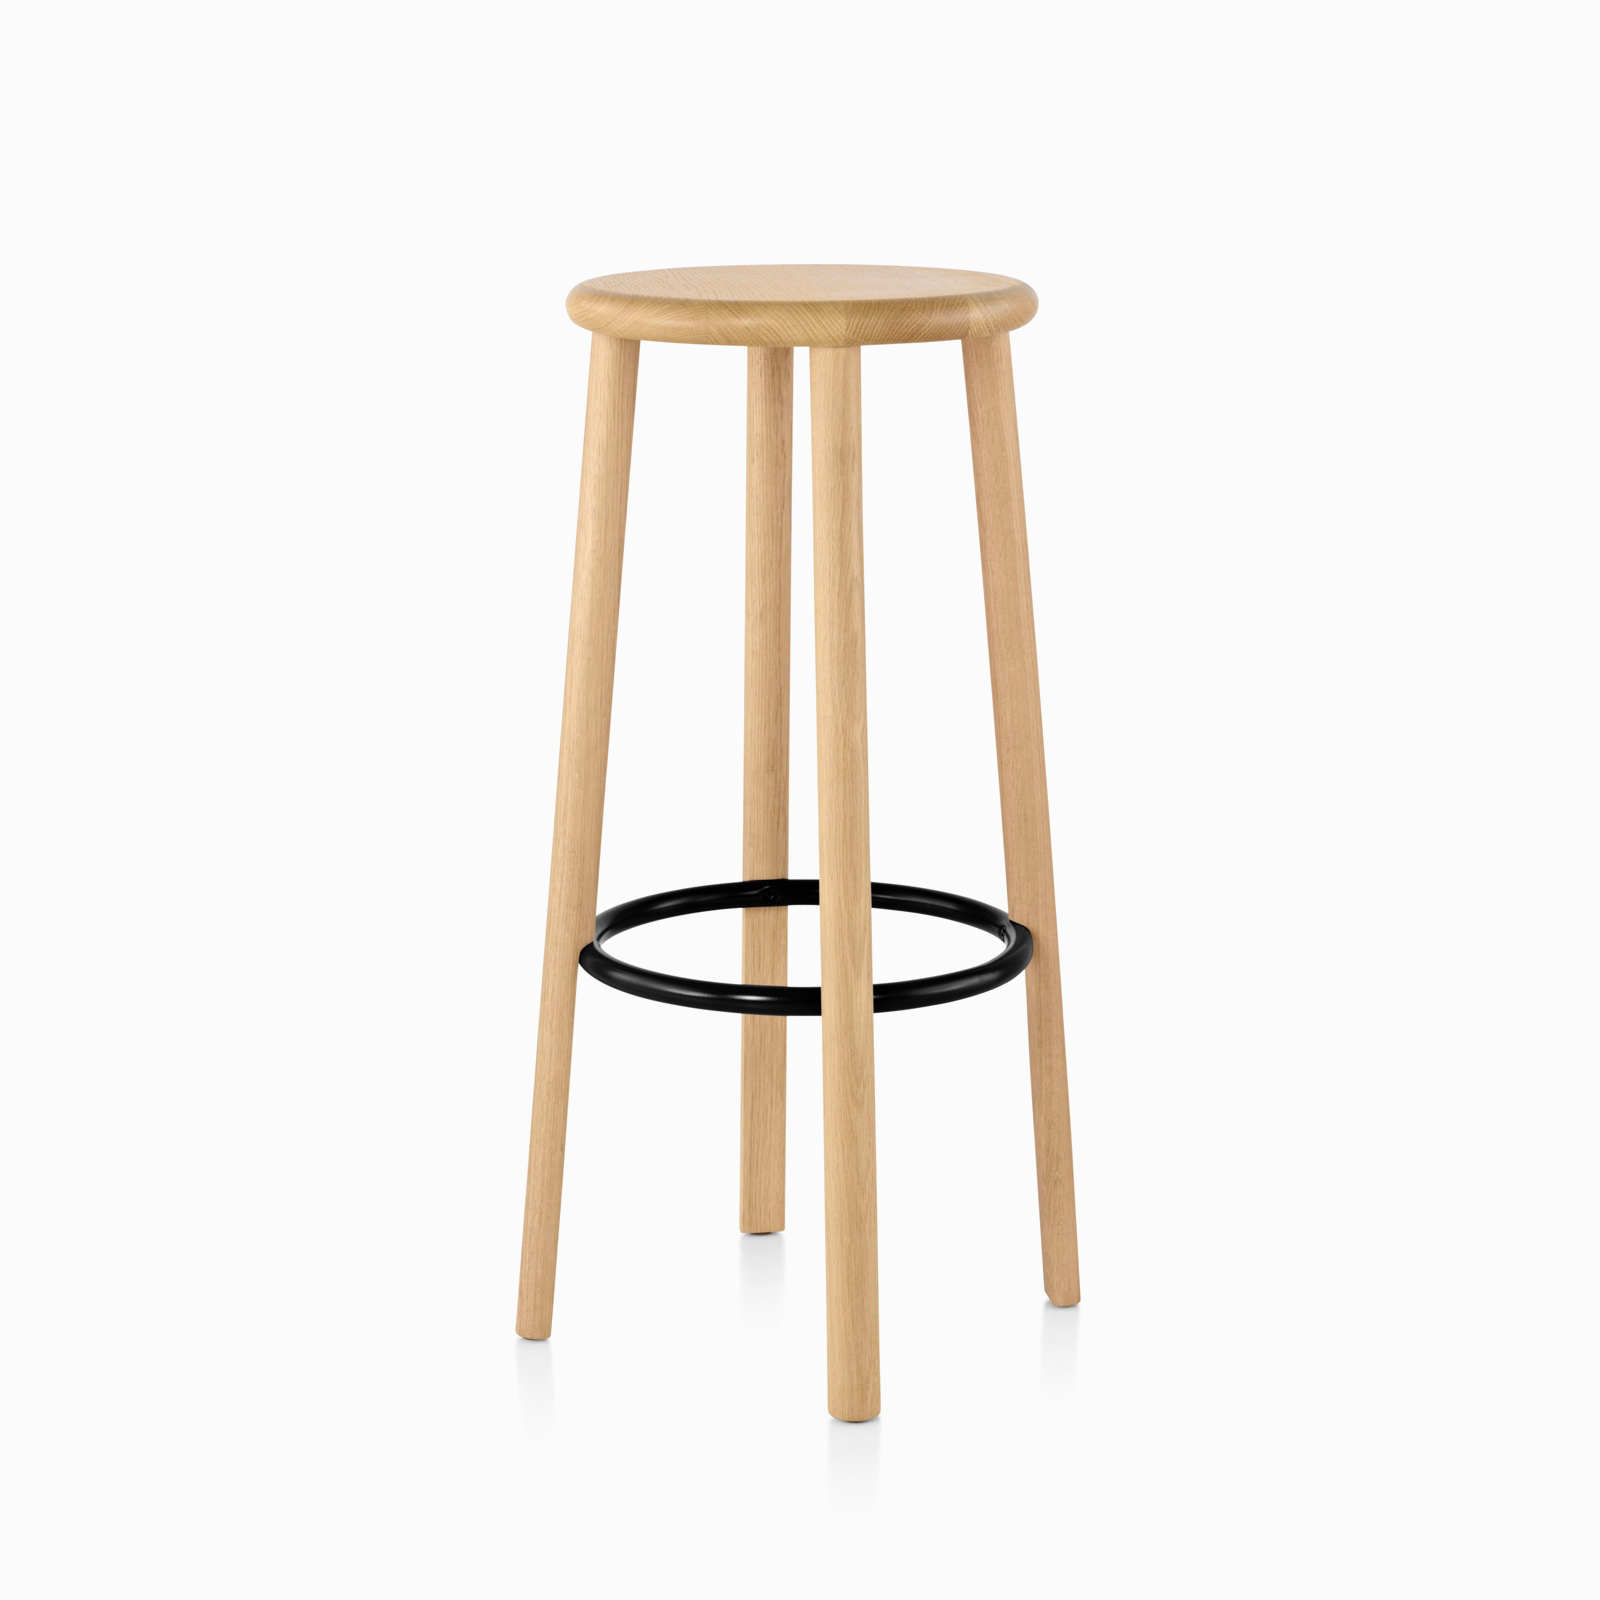 Mattiazzi Solo Stool with a light wood finish and a black footrest, viewed from an angle.